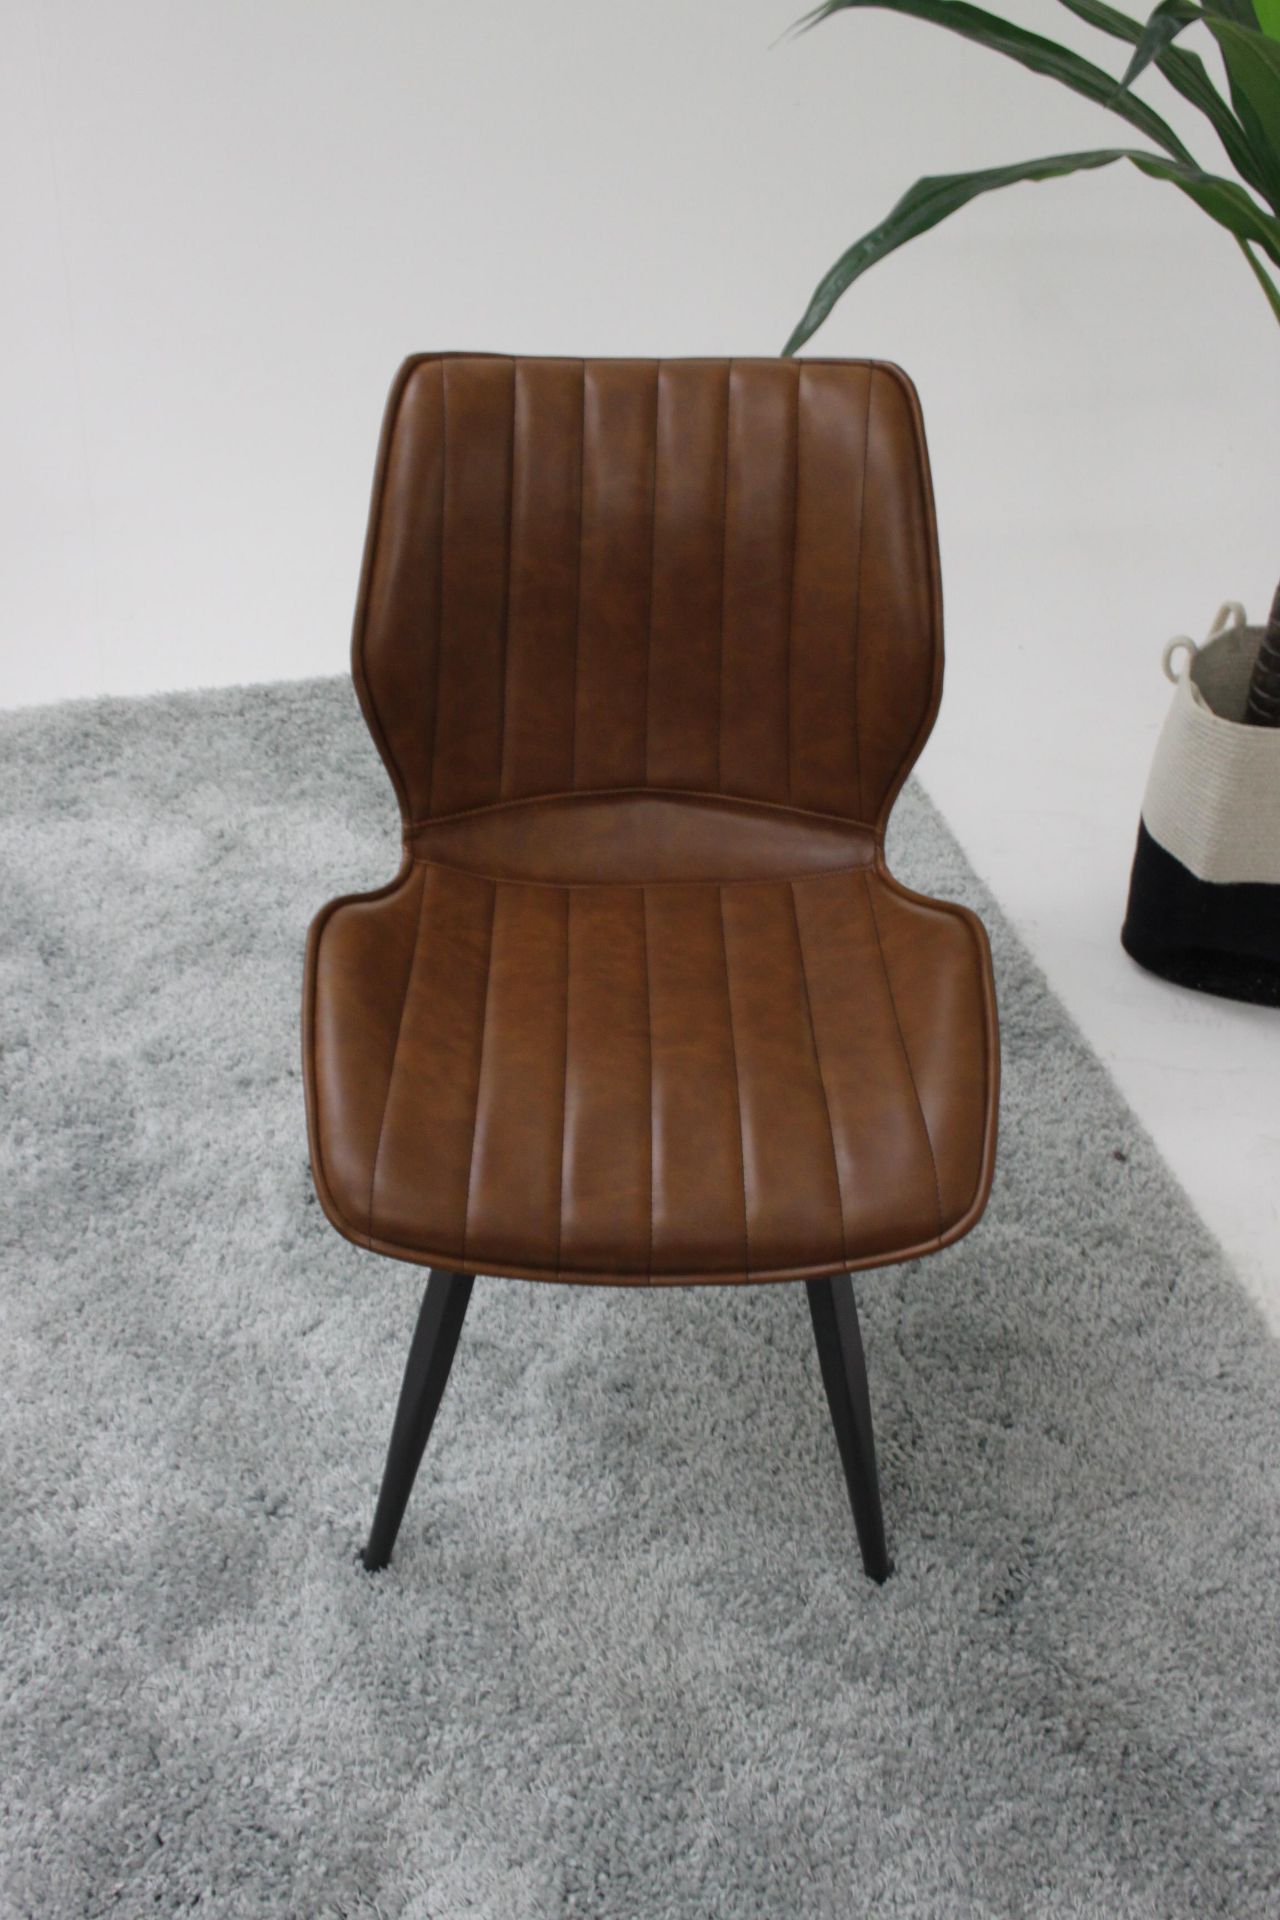 Alfa Ribbed Dining Chair Vegan Leather Tan Quilted Upholstery - Image 3 of 4